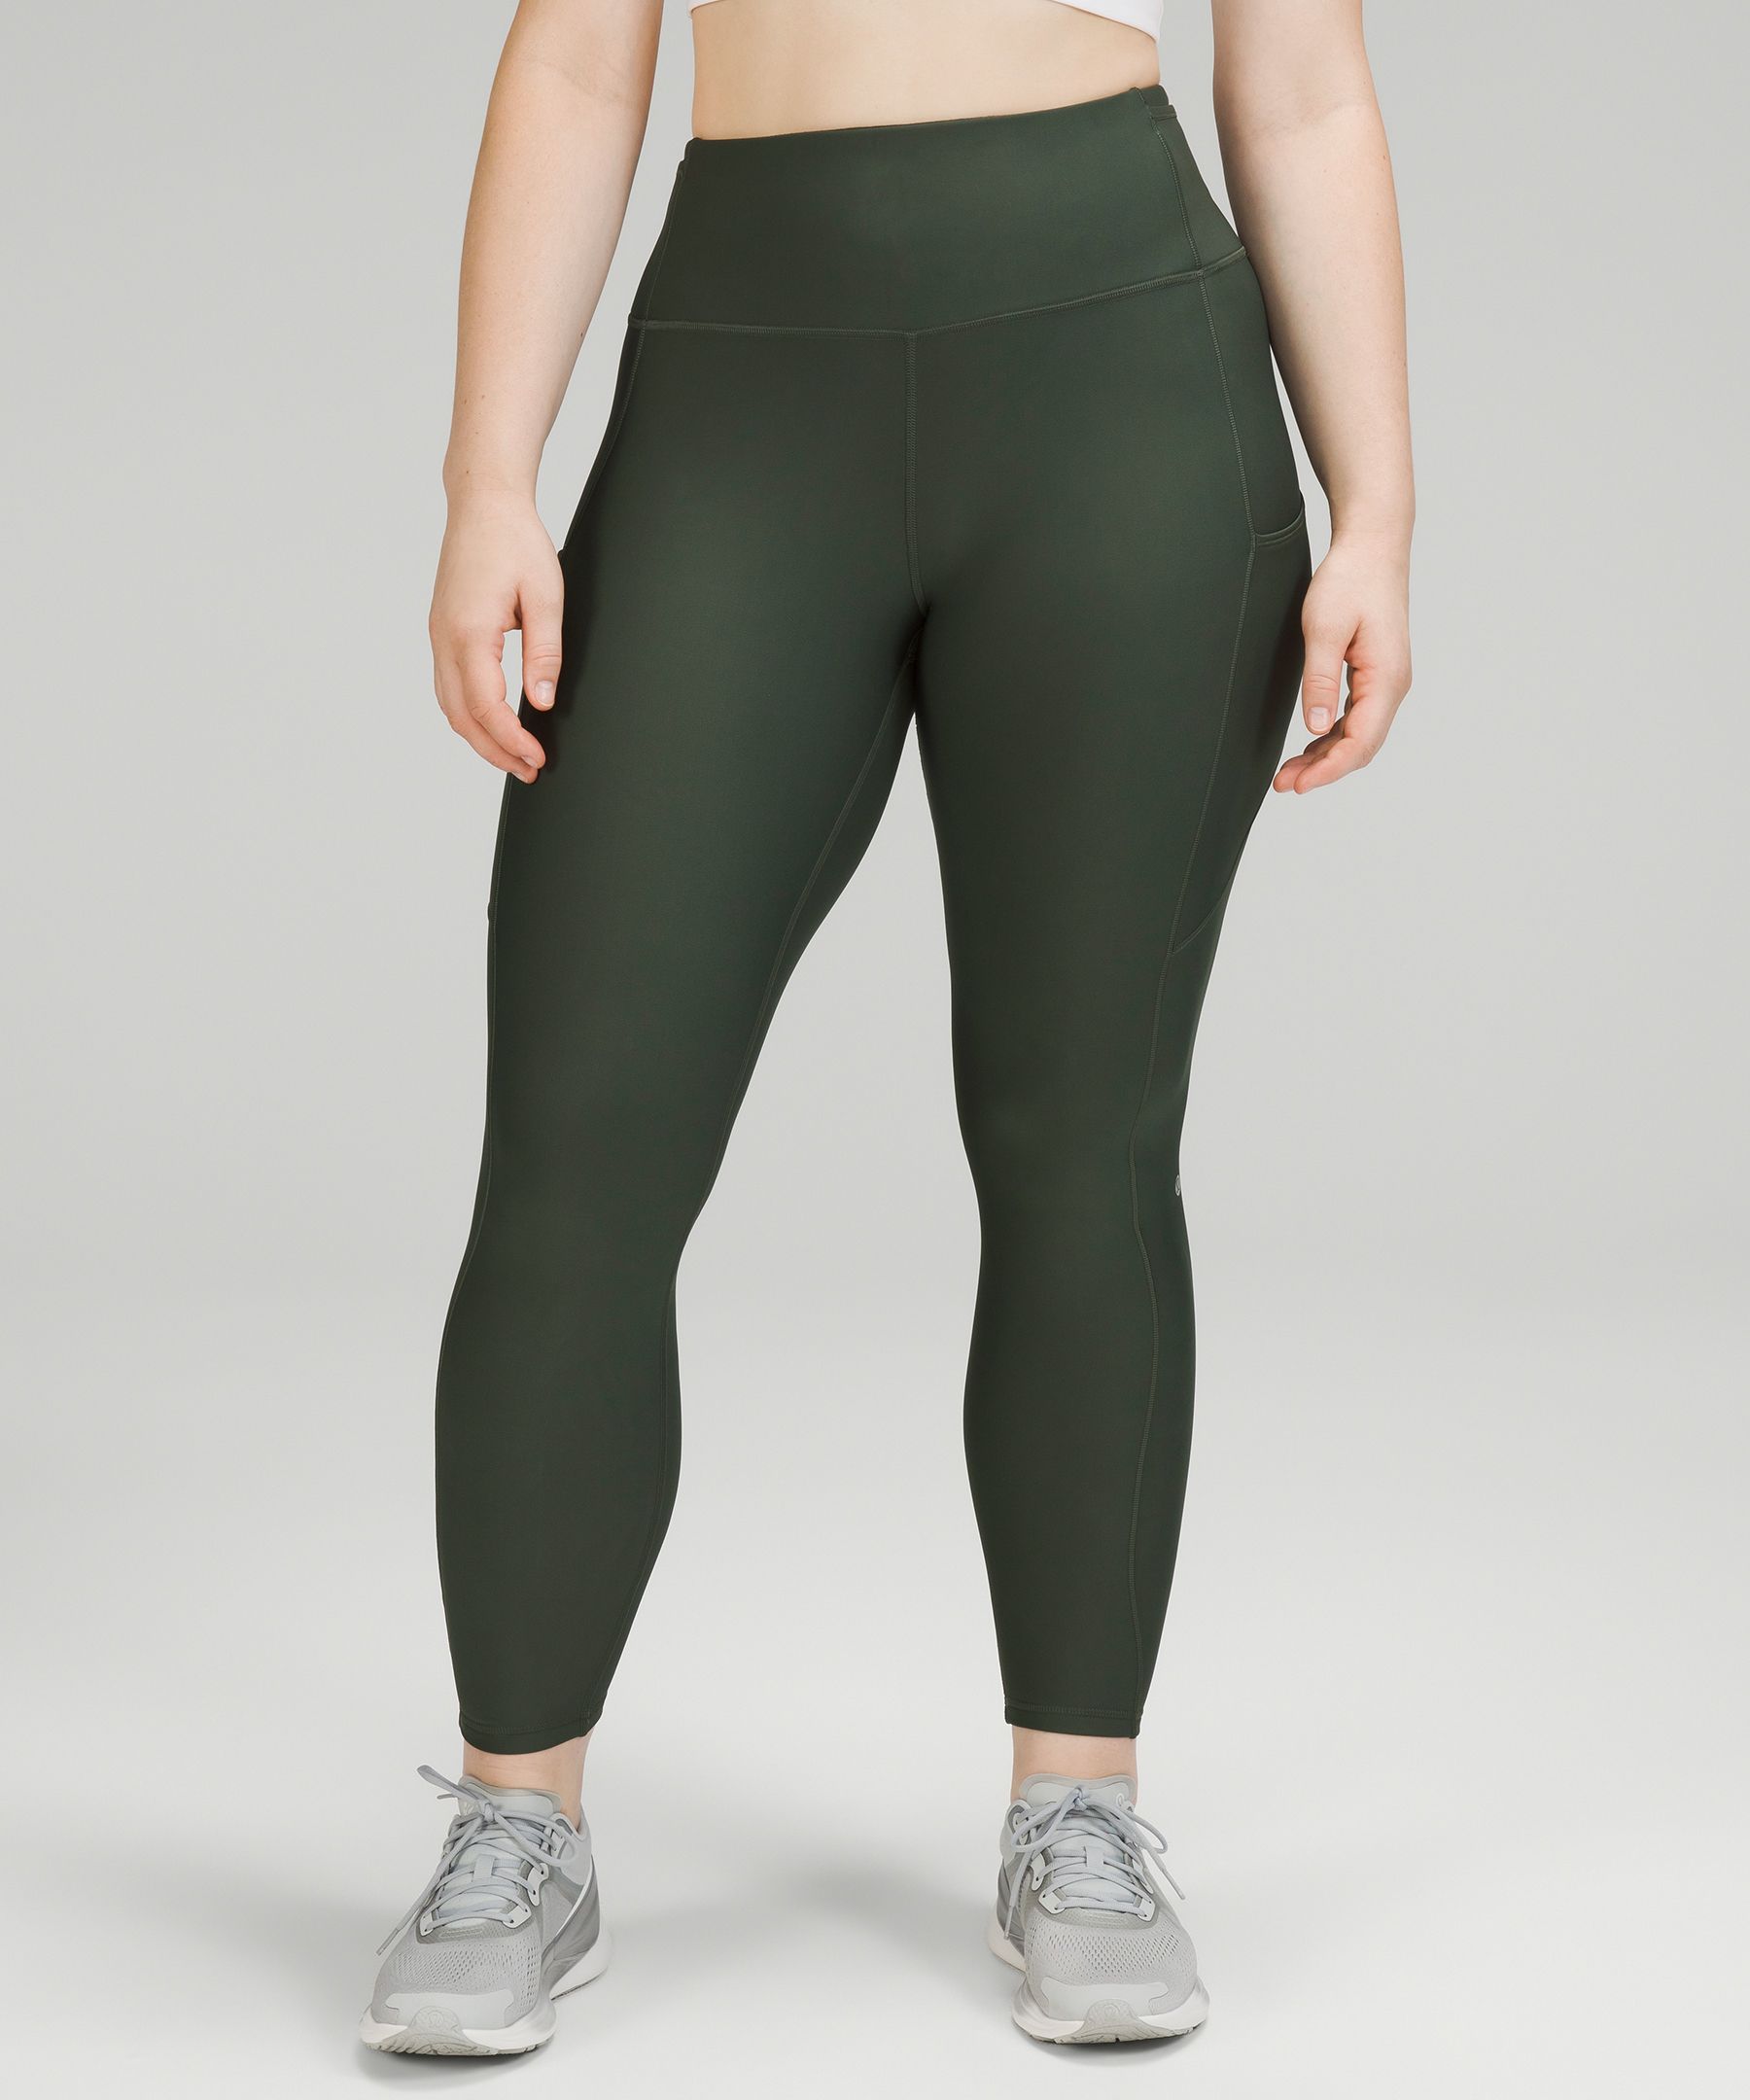 Fast and Free High-Rise Fleece Tight 